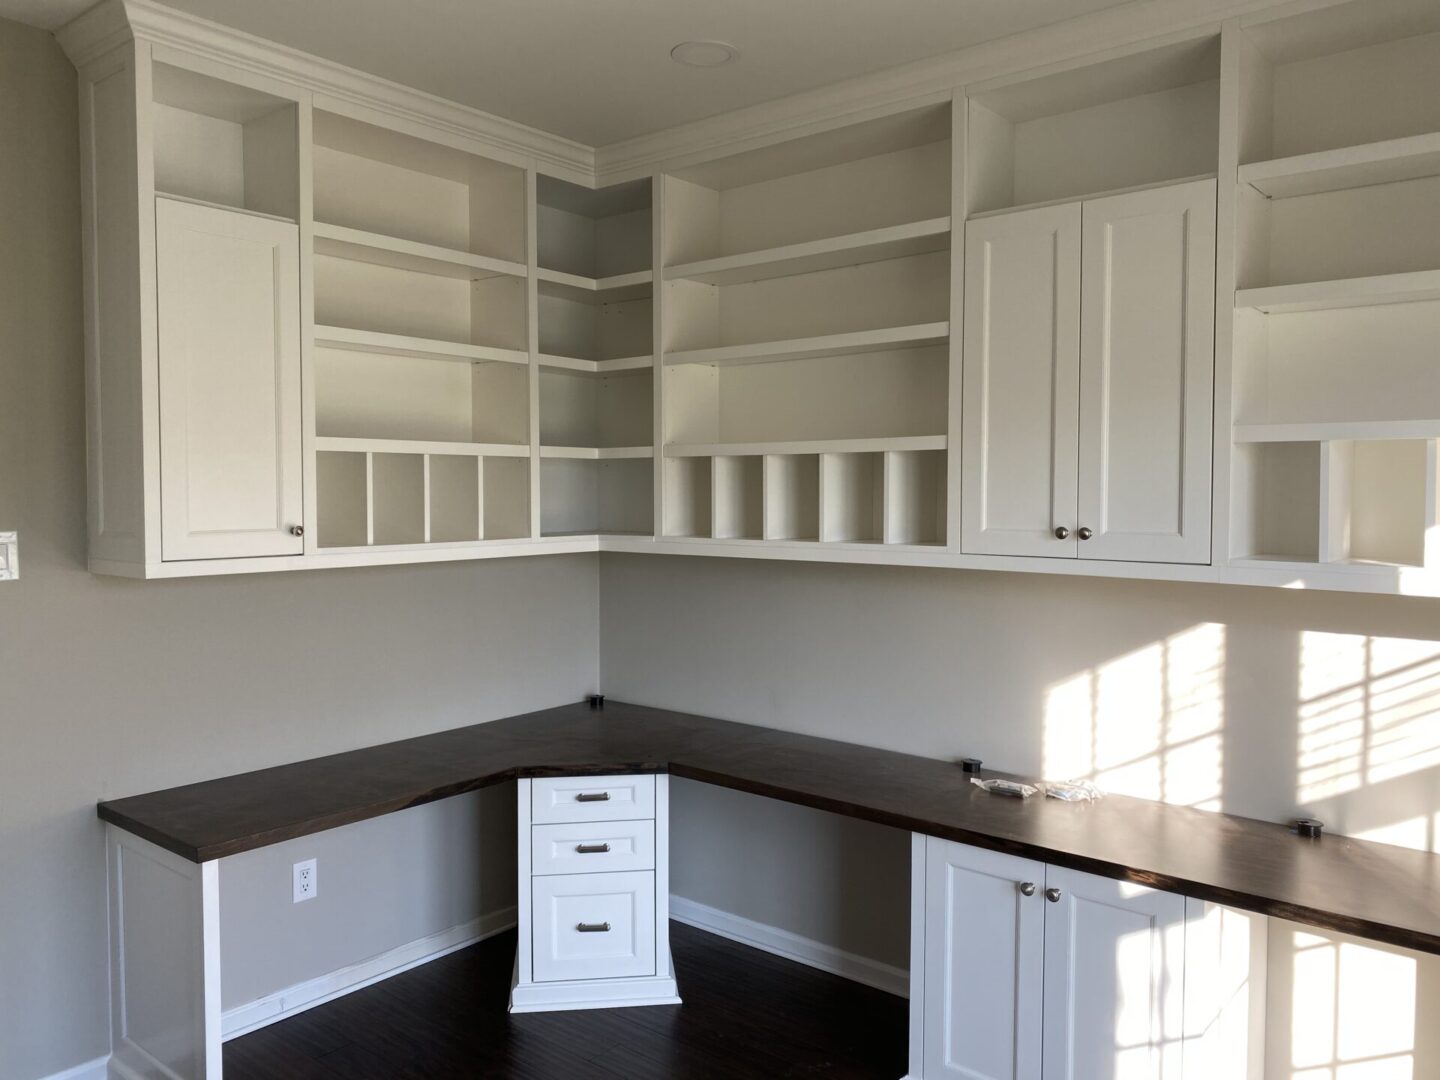 A Shelf Unit Space With a White Cabinets and a Counter